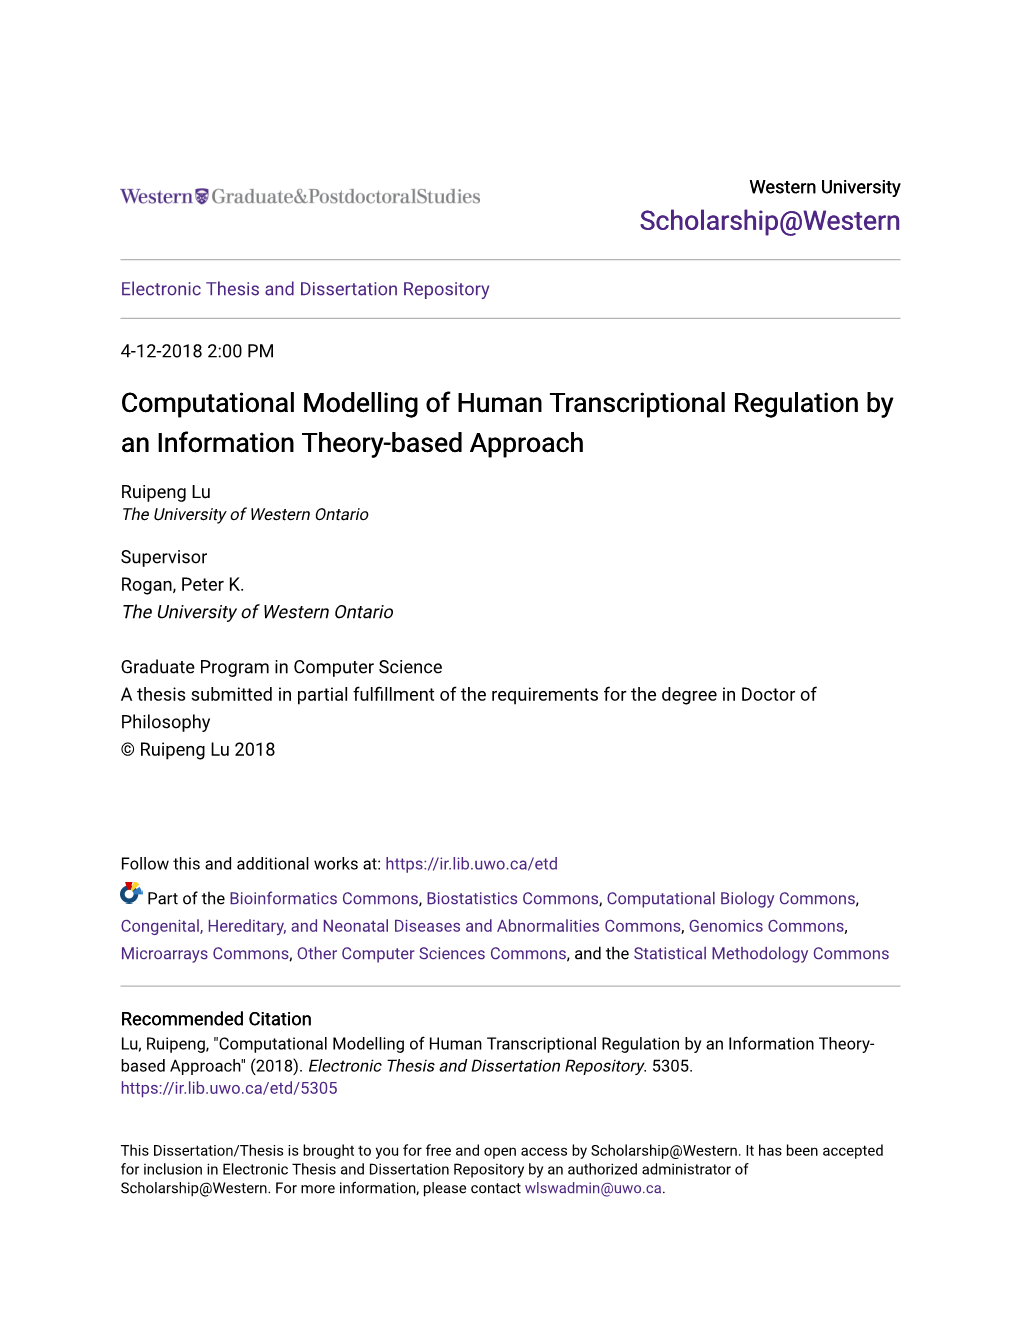 Computational Modelling of Human Transcriptional Regulation by an Information Theory-Based Approach